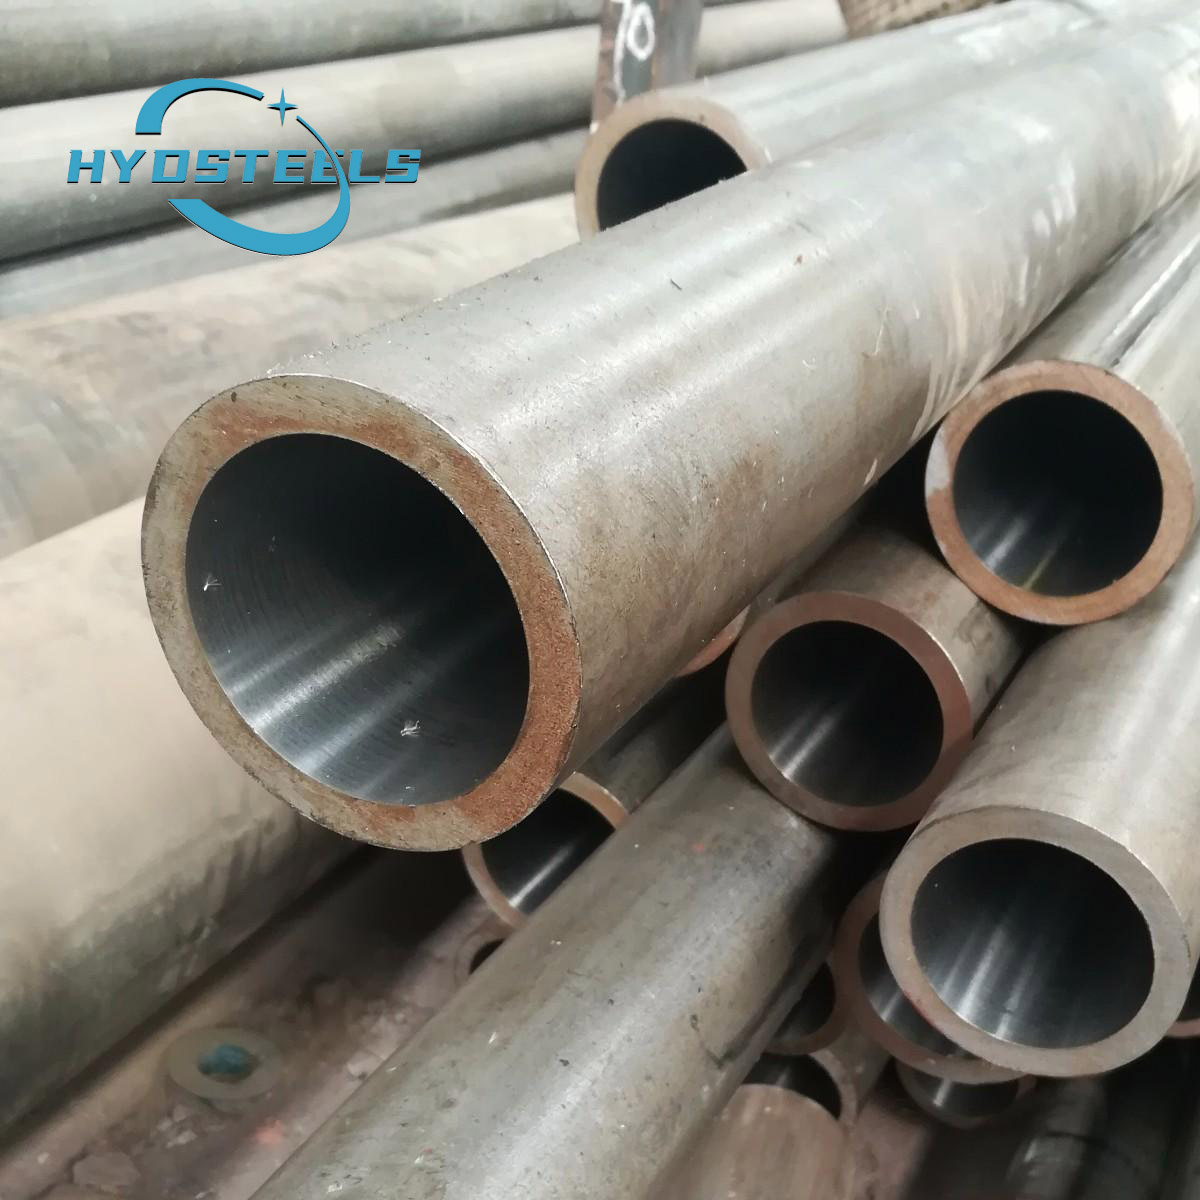 ST52 Hydraulic Honed Tubes Manufacturer 